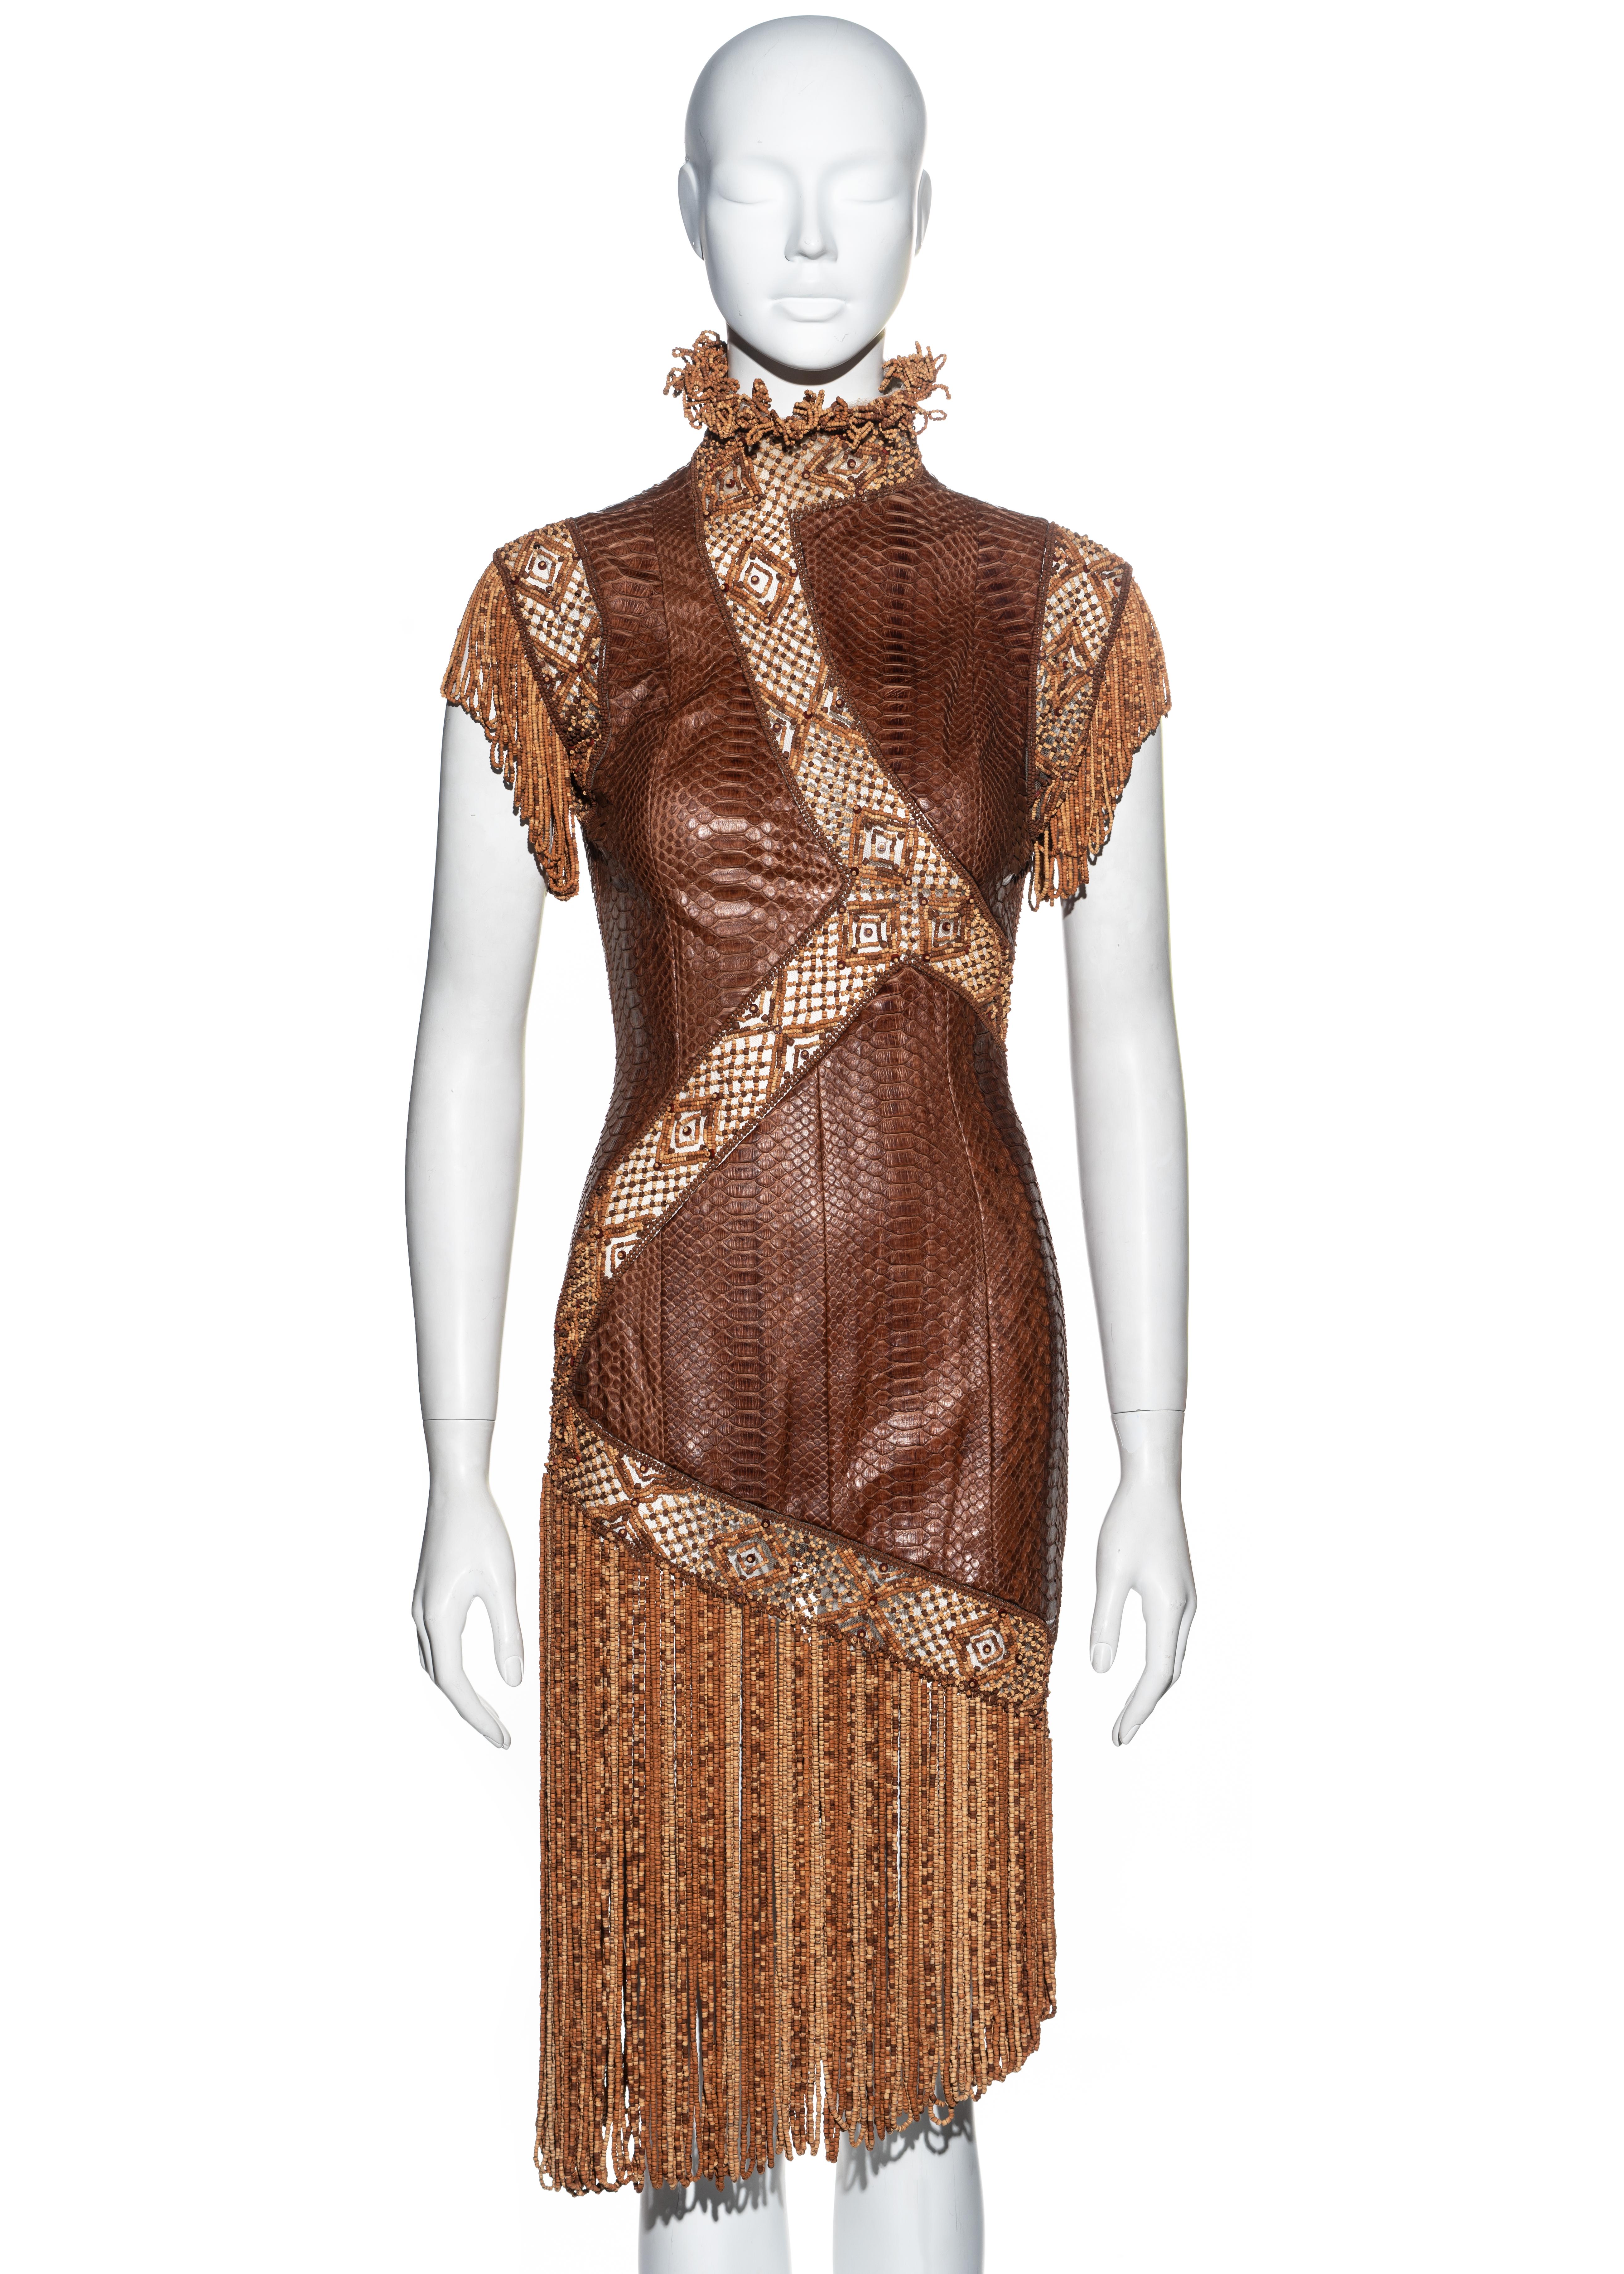 ▪ Givenchy Haute Couture brown snakeskin dress 
▪ Designed by Alexander McQueen
▪ Skintight fit 
▪ Vertical snakeskin panels with tulle bands 
▪ Embroidered with wood and cork beads 
▪ Beaded looped fringes on skirt, sleeves and collar
▪ Press